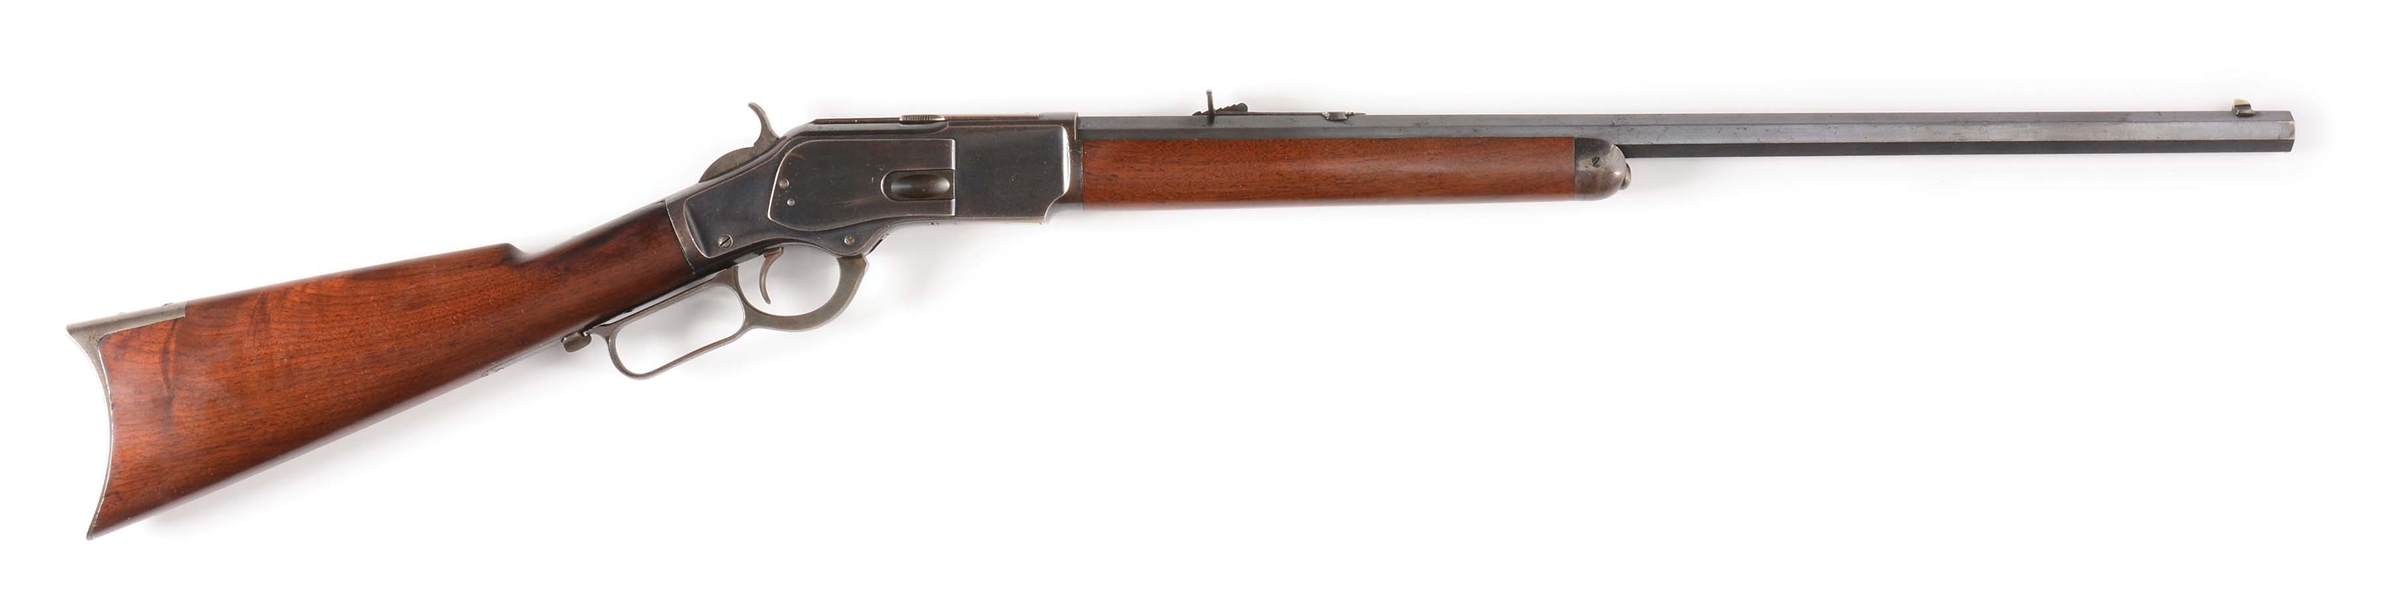 (A) HIGH CONDITION WINCHESTER 3RD MODEL 1873 BUTTON MAGAZINE LEVER ACTION RIFLE (1887).